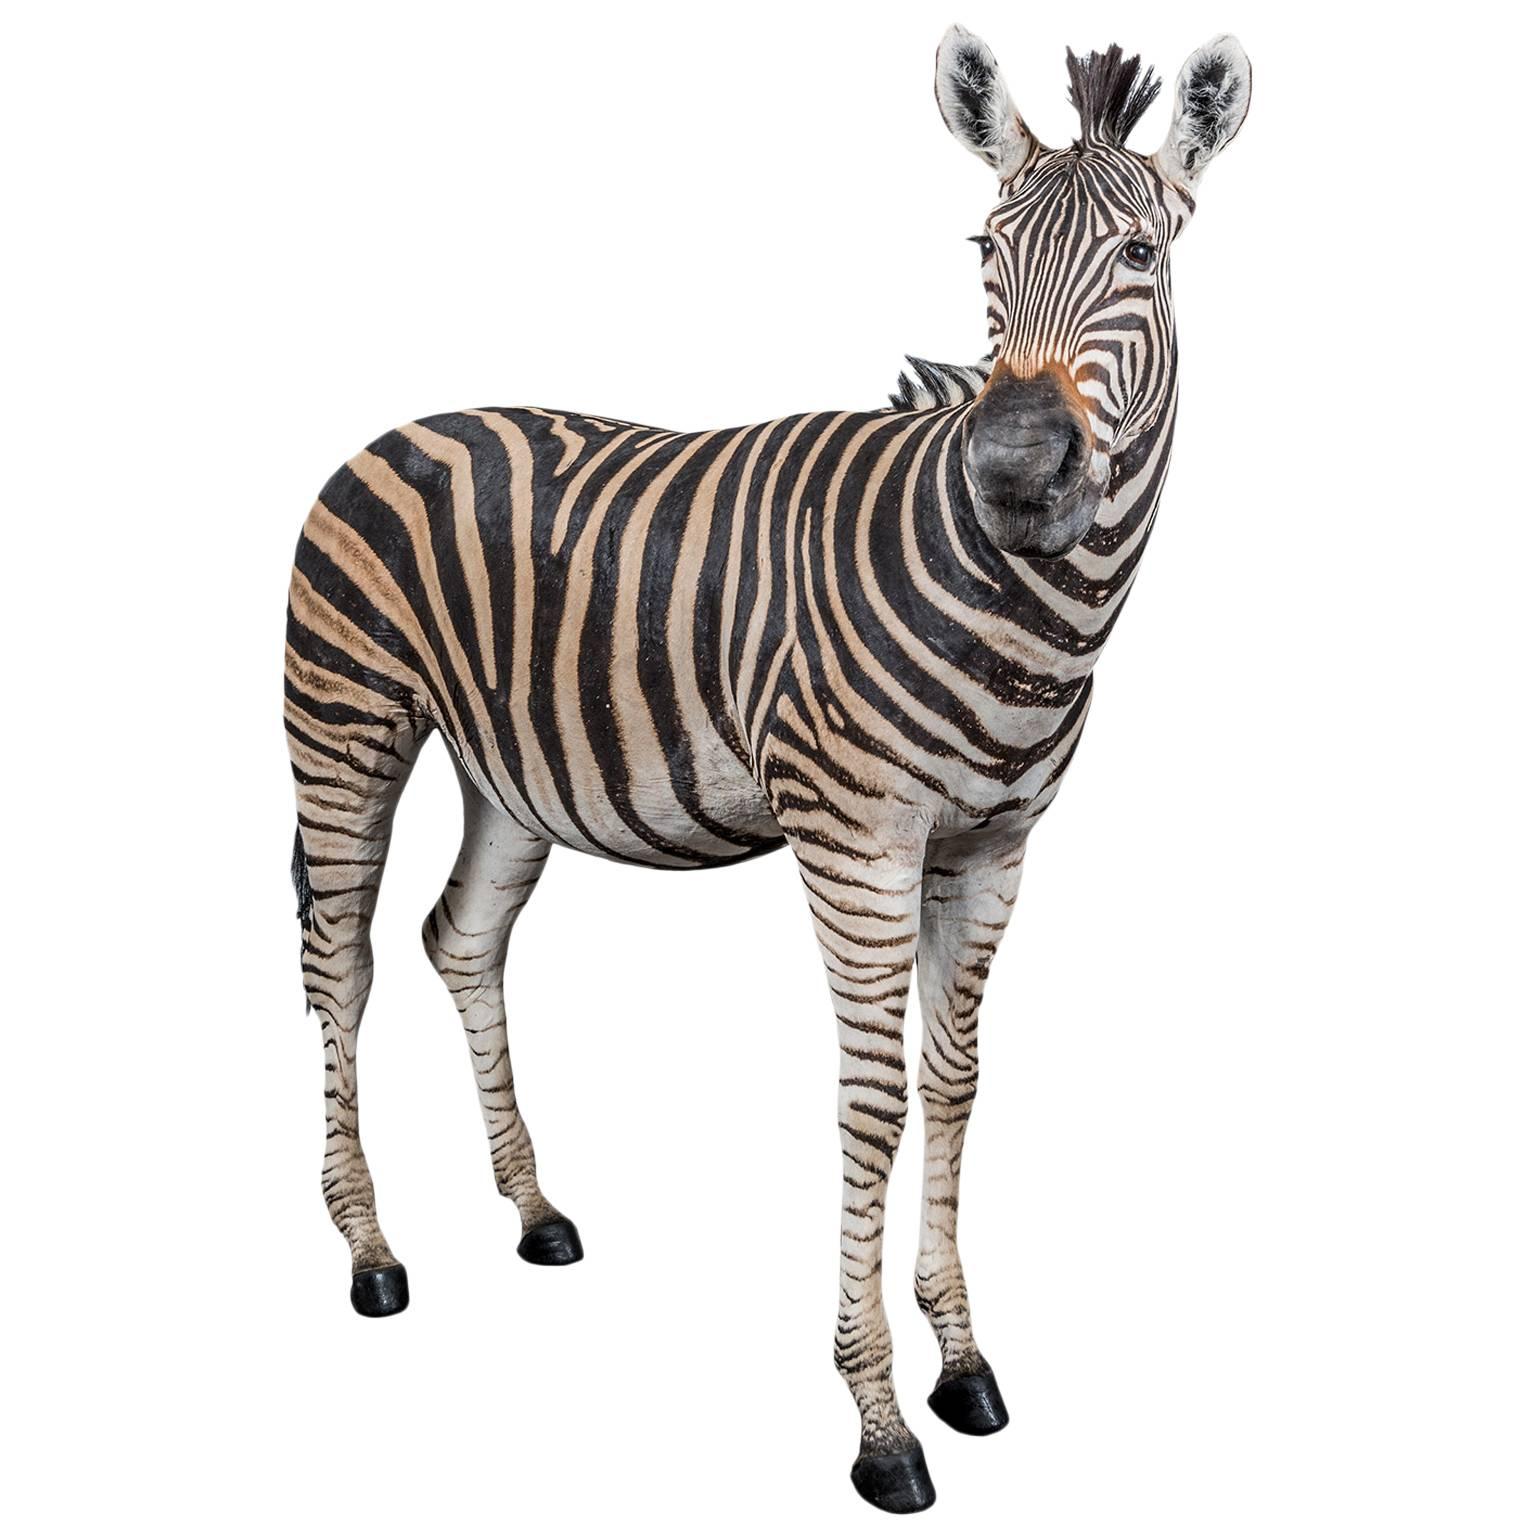 Rare Freestanding Full Taxidermy Mount of a Burchell's Zebra from South Africa